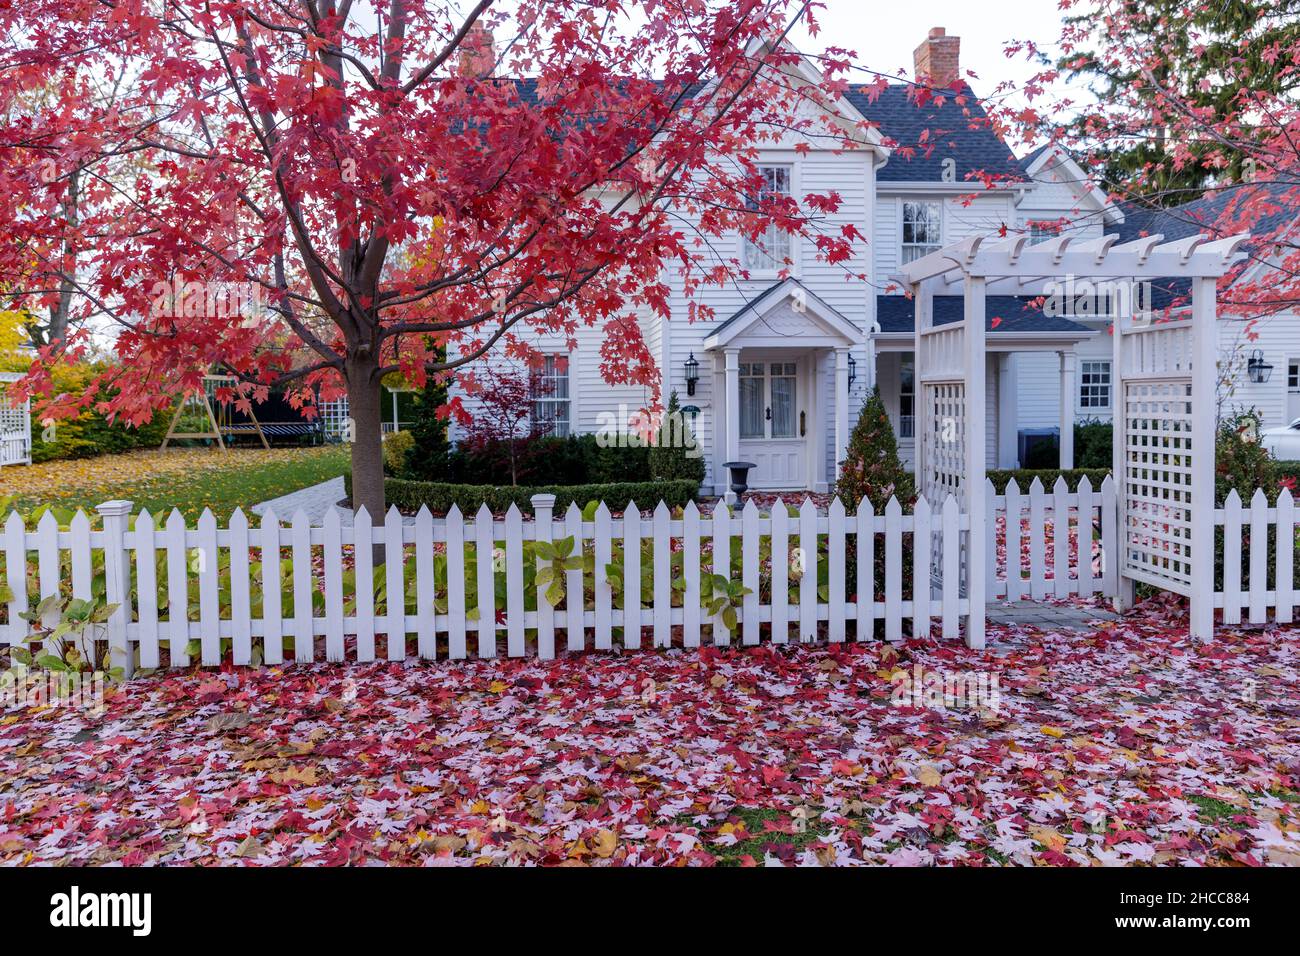 maple leaves covering the ground, with a white house house and white picket fence. Stock Photo